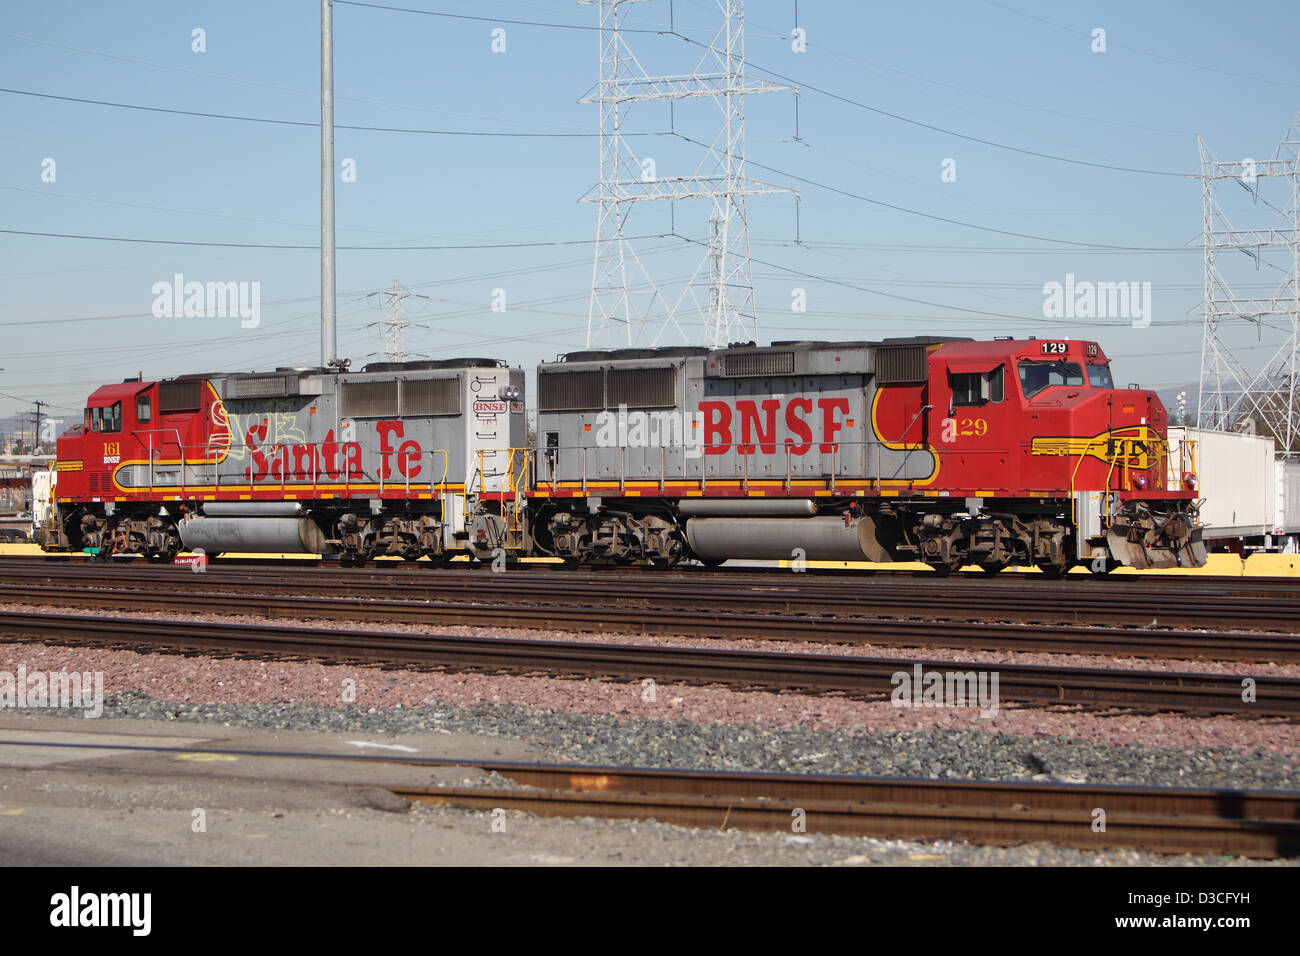 BNSF Locomotove 129 parked on tracks in the City of Vernon in California on February 12, 2013. ONLY AVAILABLE ON ALAMY Stock Photo